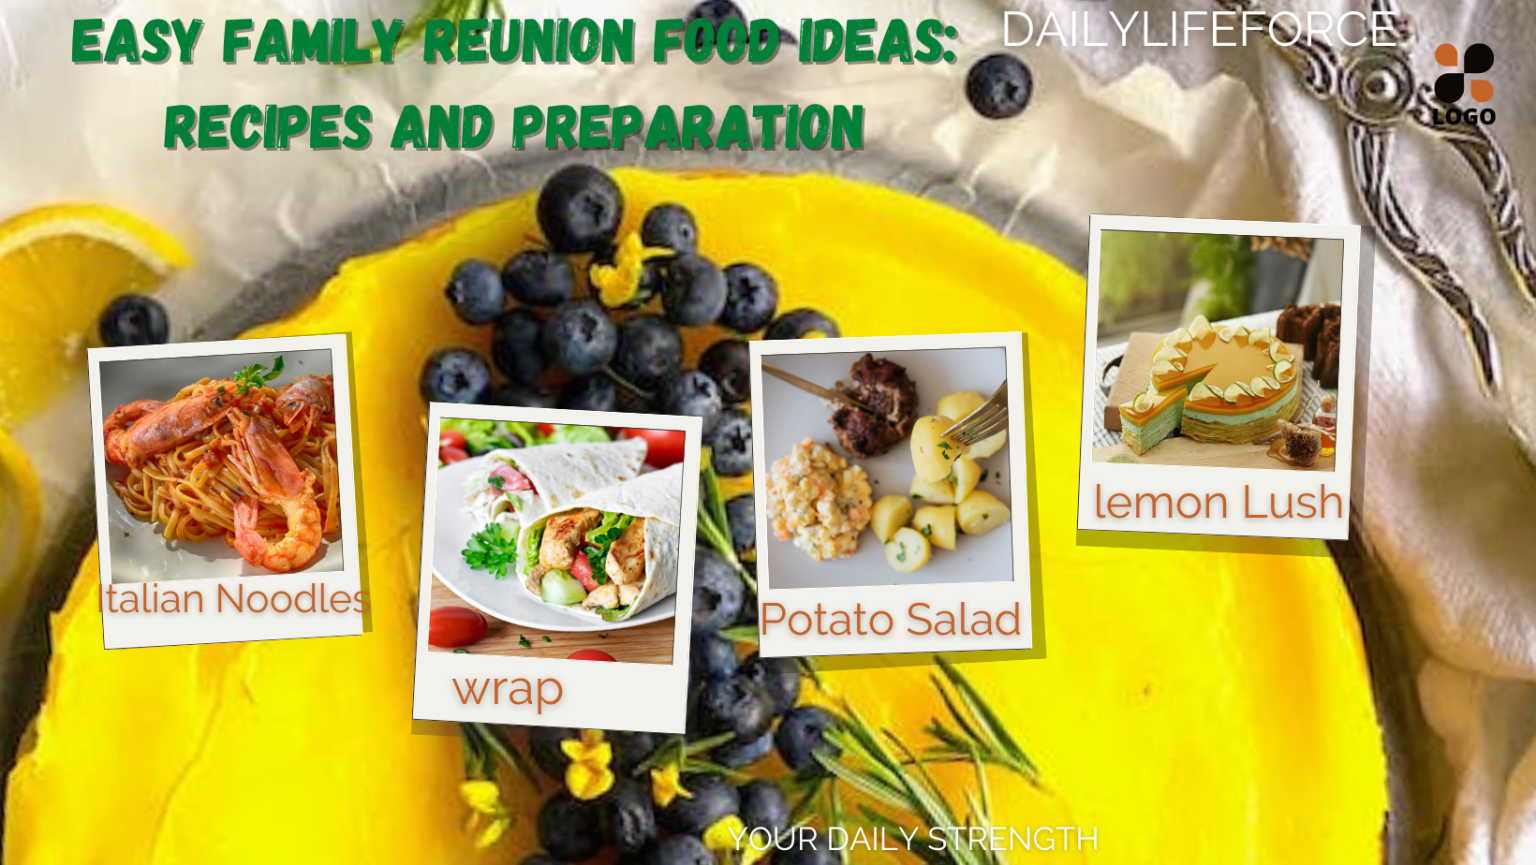 6 Easy Family Reunion Food Ideas Preparation, and Recipes